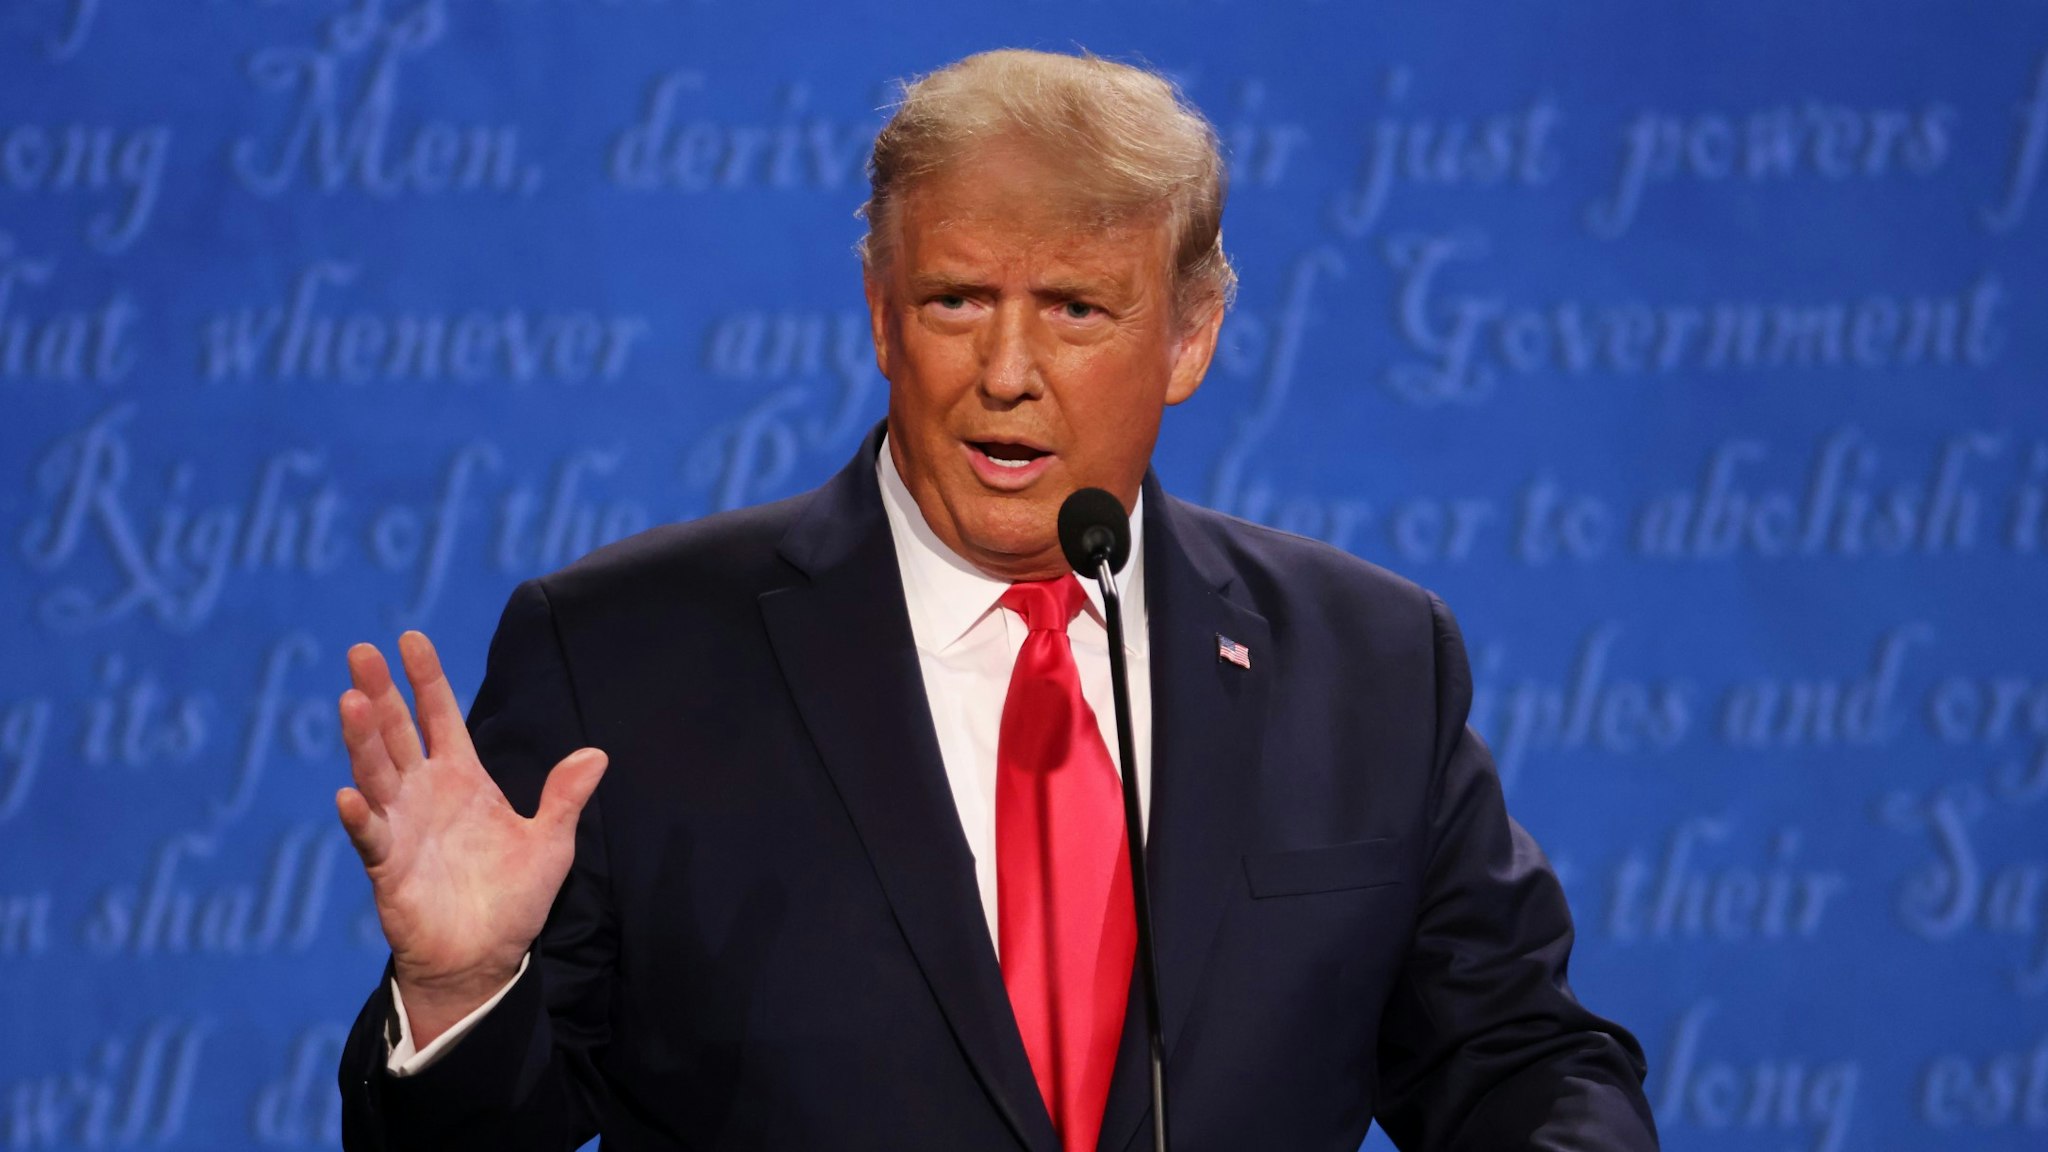 NASHVILLE, TENNESSEE - OCTOBER 22: U.S. President Donald Trump participates in the final presidential debate against Democratic presidential nominee Joe Biden at Belmont University on October 22, 2020 in Nashville, Tennessee. This is the last debate between the two candidates before the election on November 3.